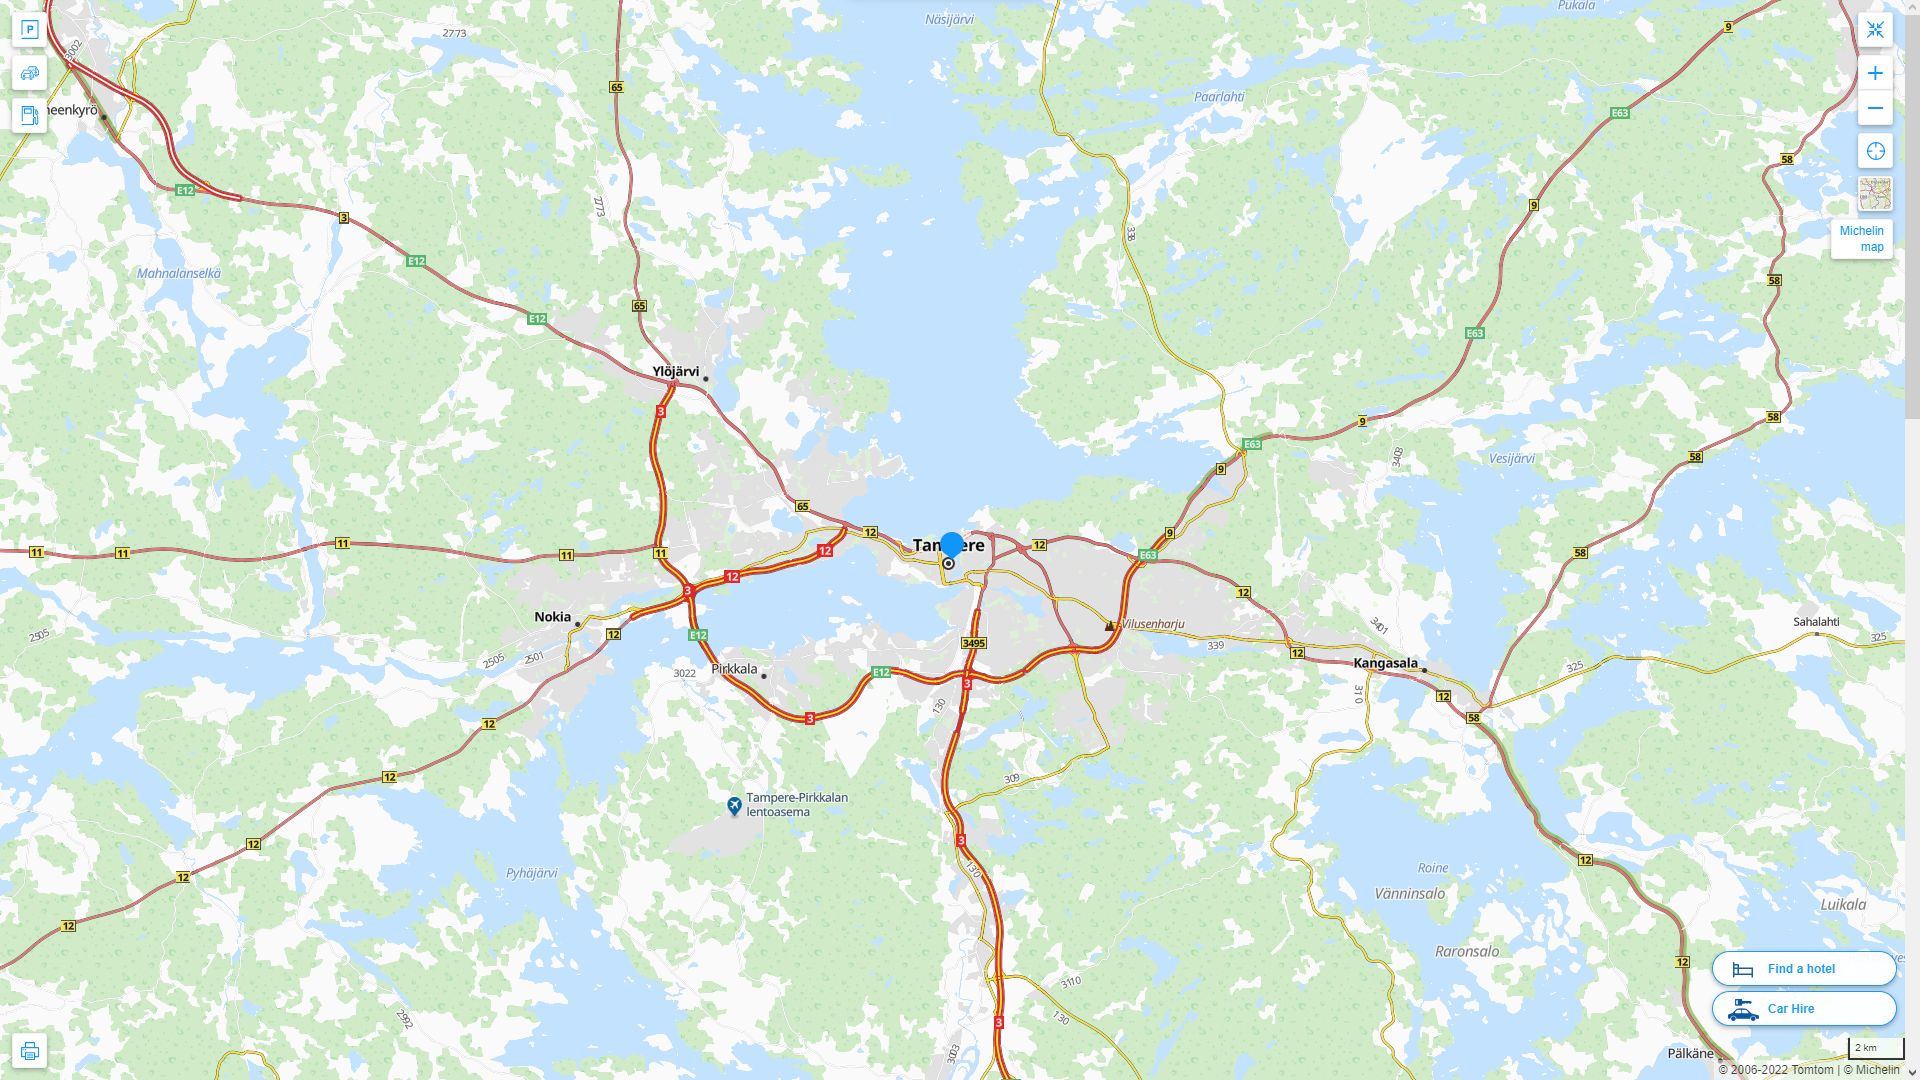 Tampere Highway and Road Map